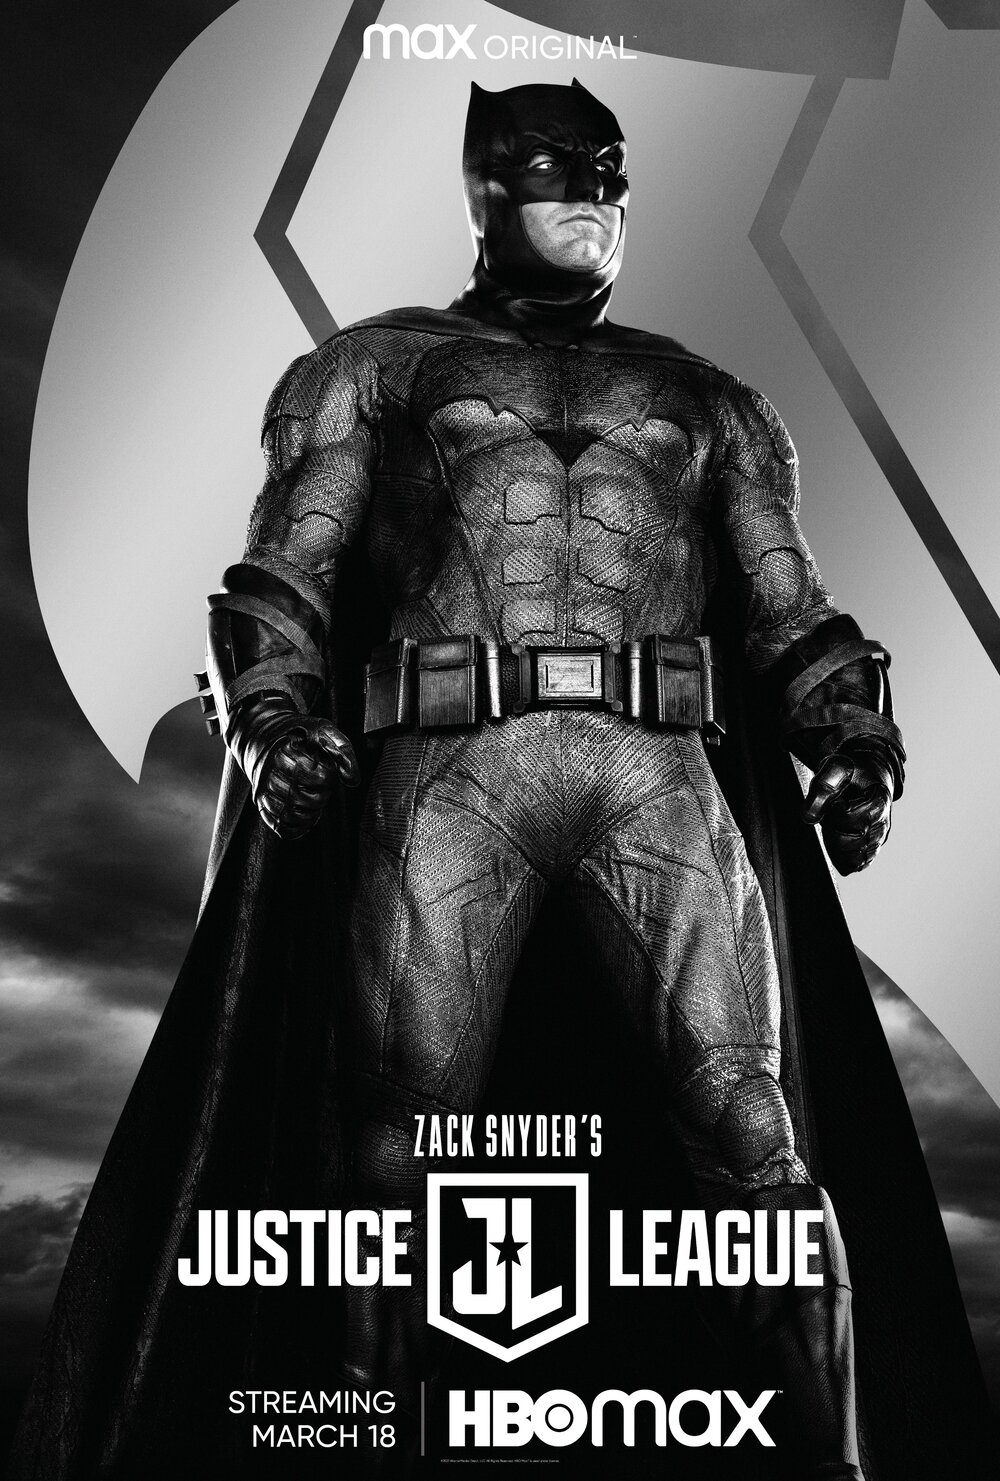 zack-snyders-justice-league-gets-a-new-trailer-focusing-on-batman